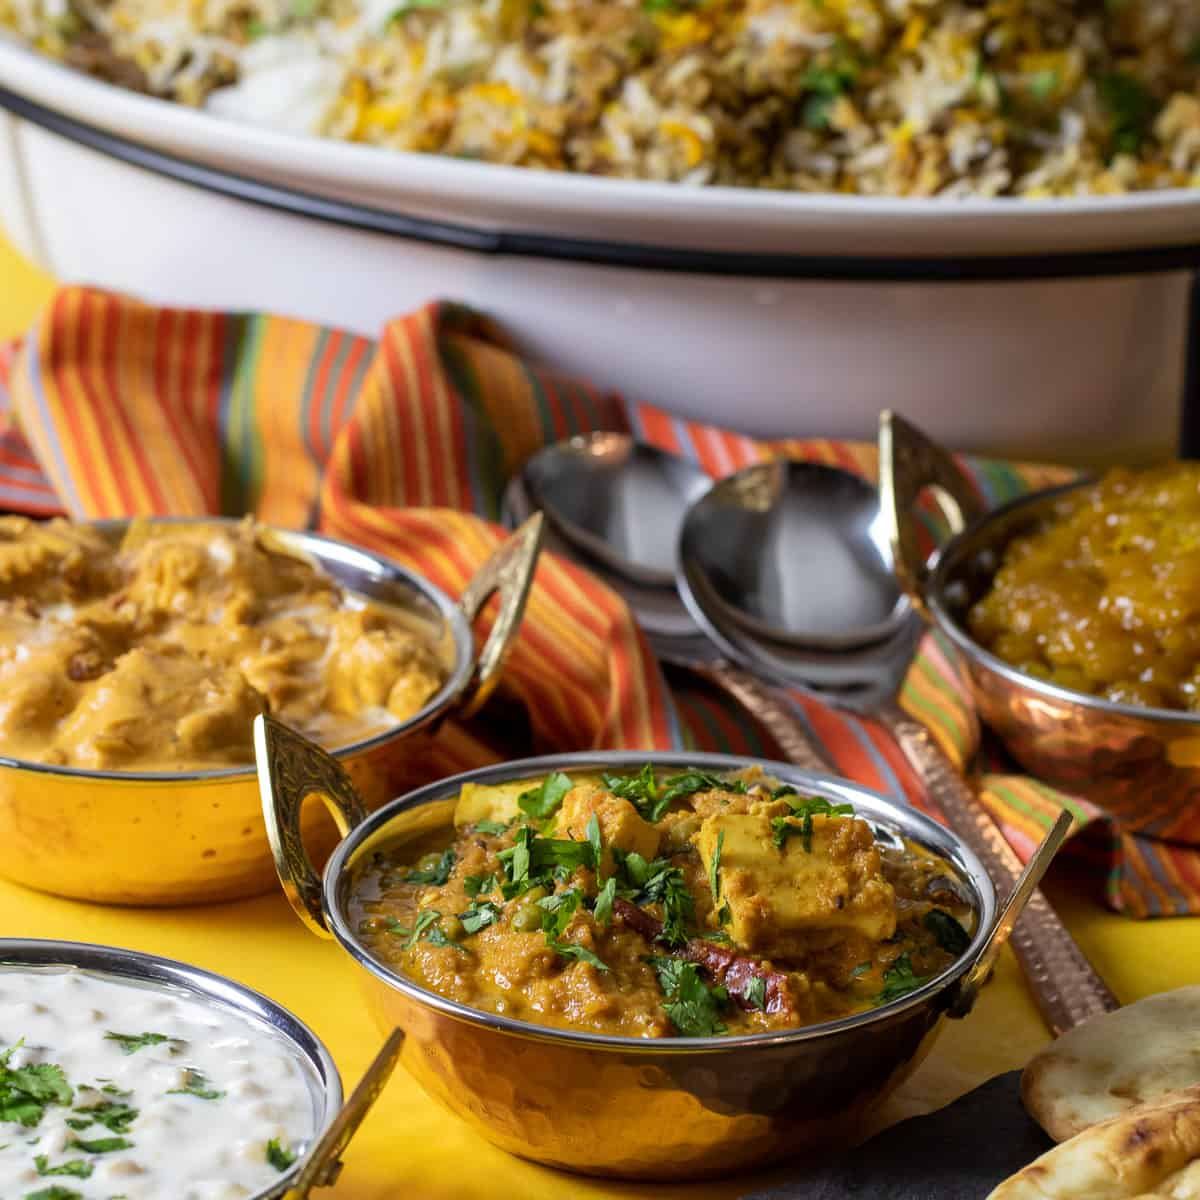 A full Indian feast with many dishes.